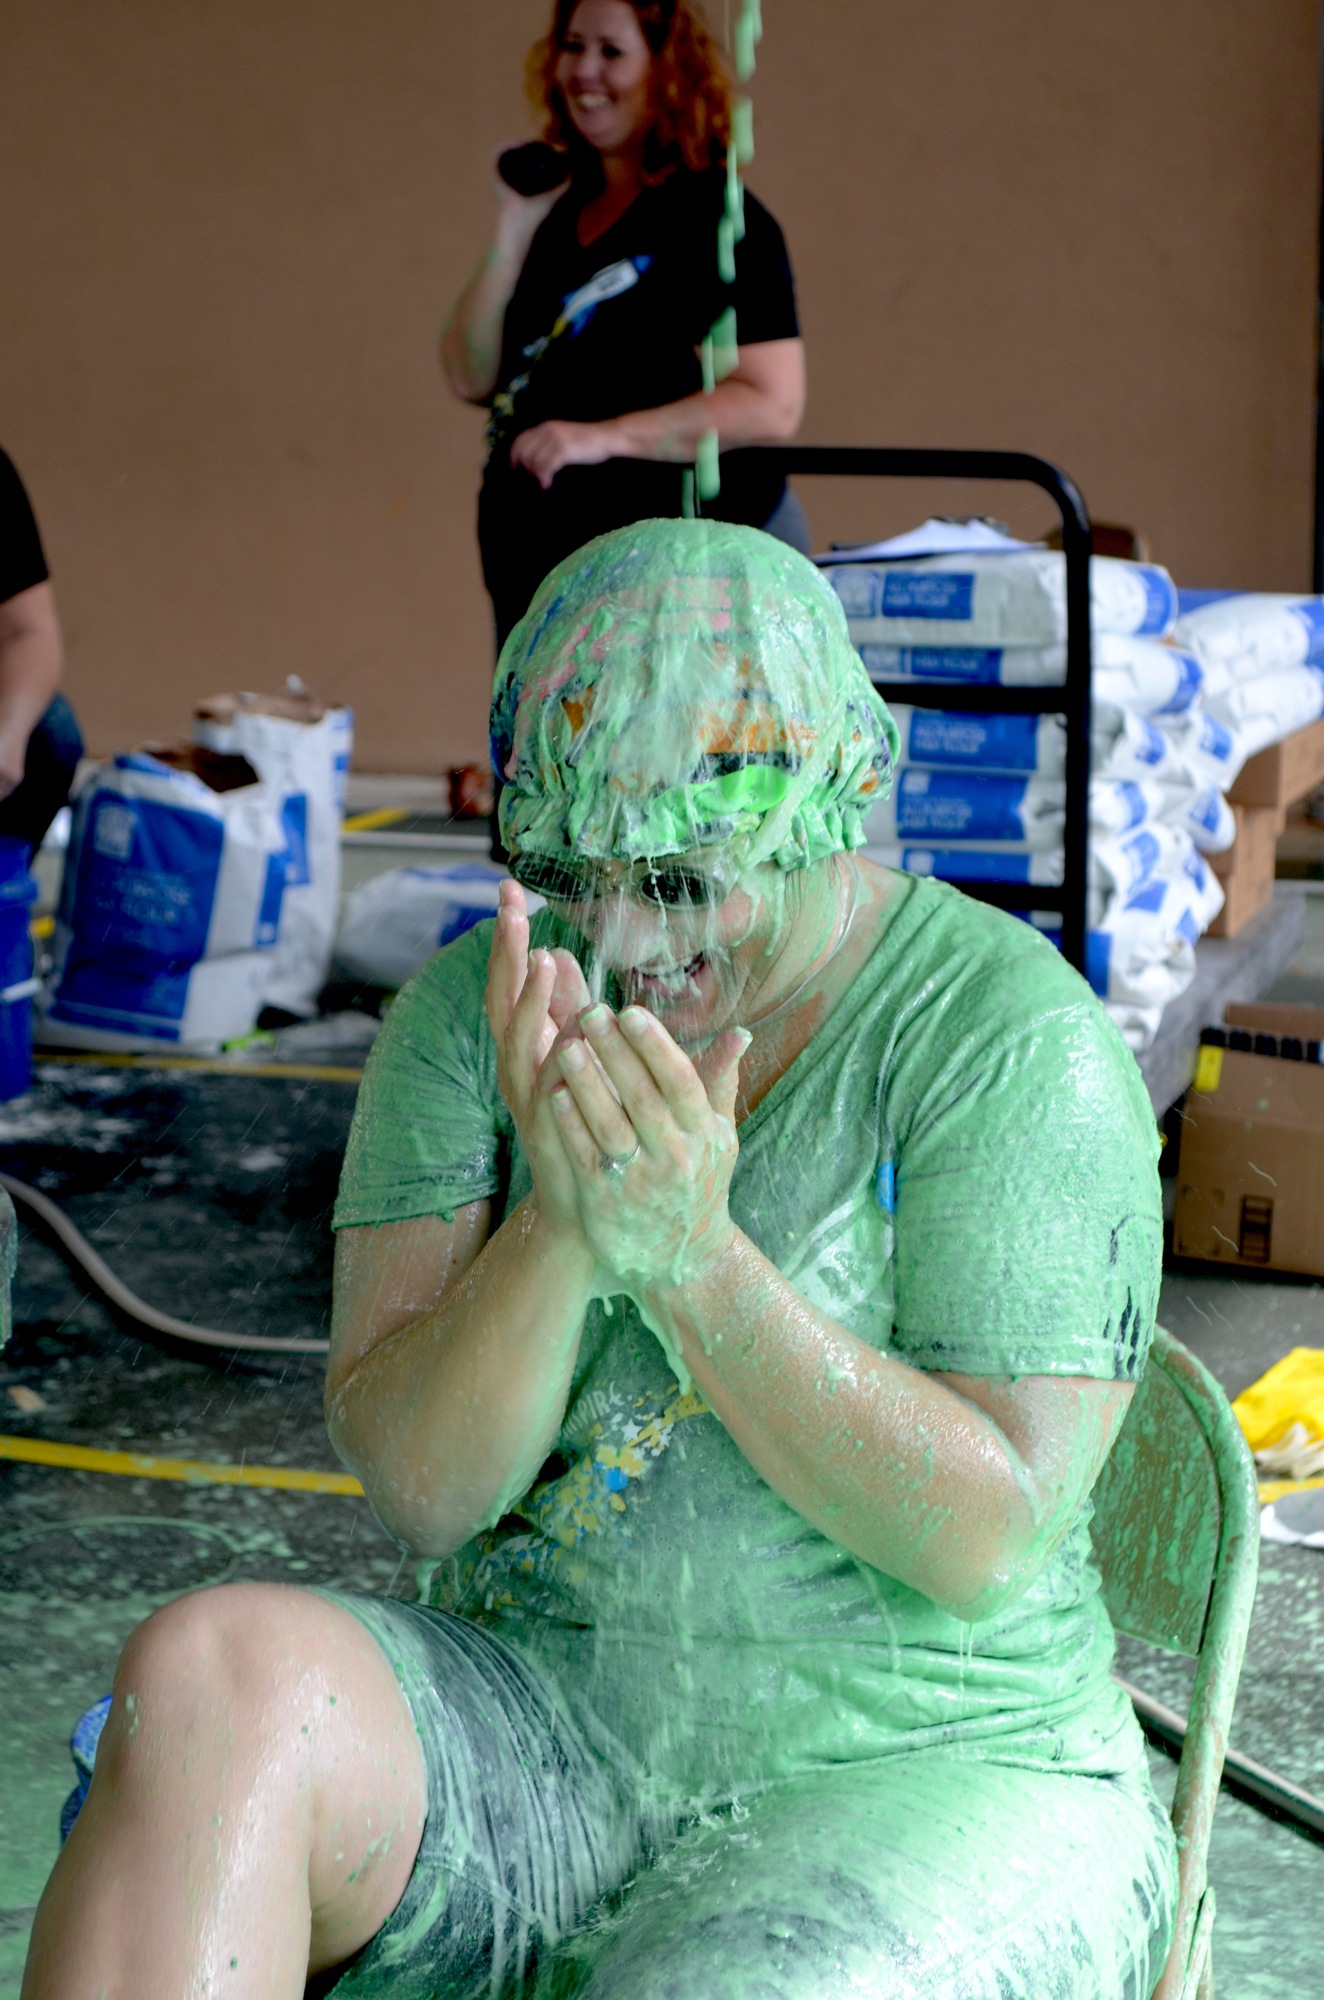 Assistant Principal Samantha Webb sat through more than two hours of students dumping slime on her.